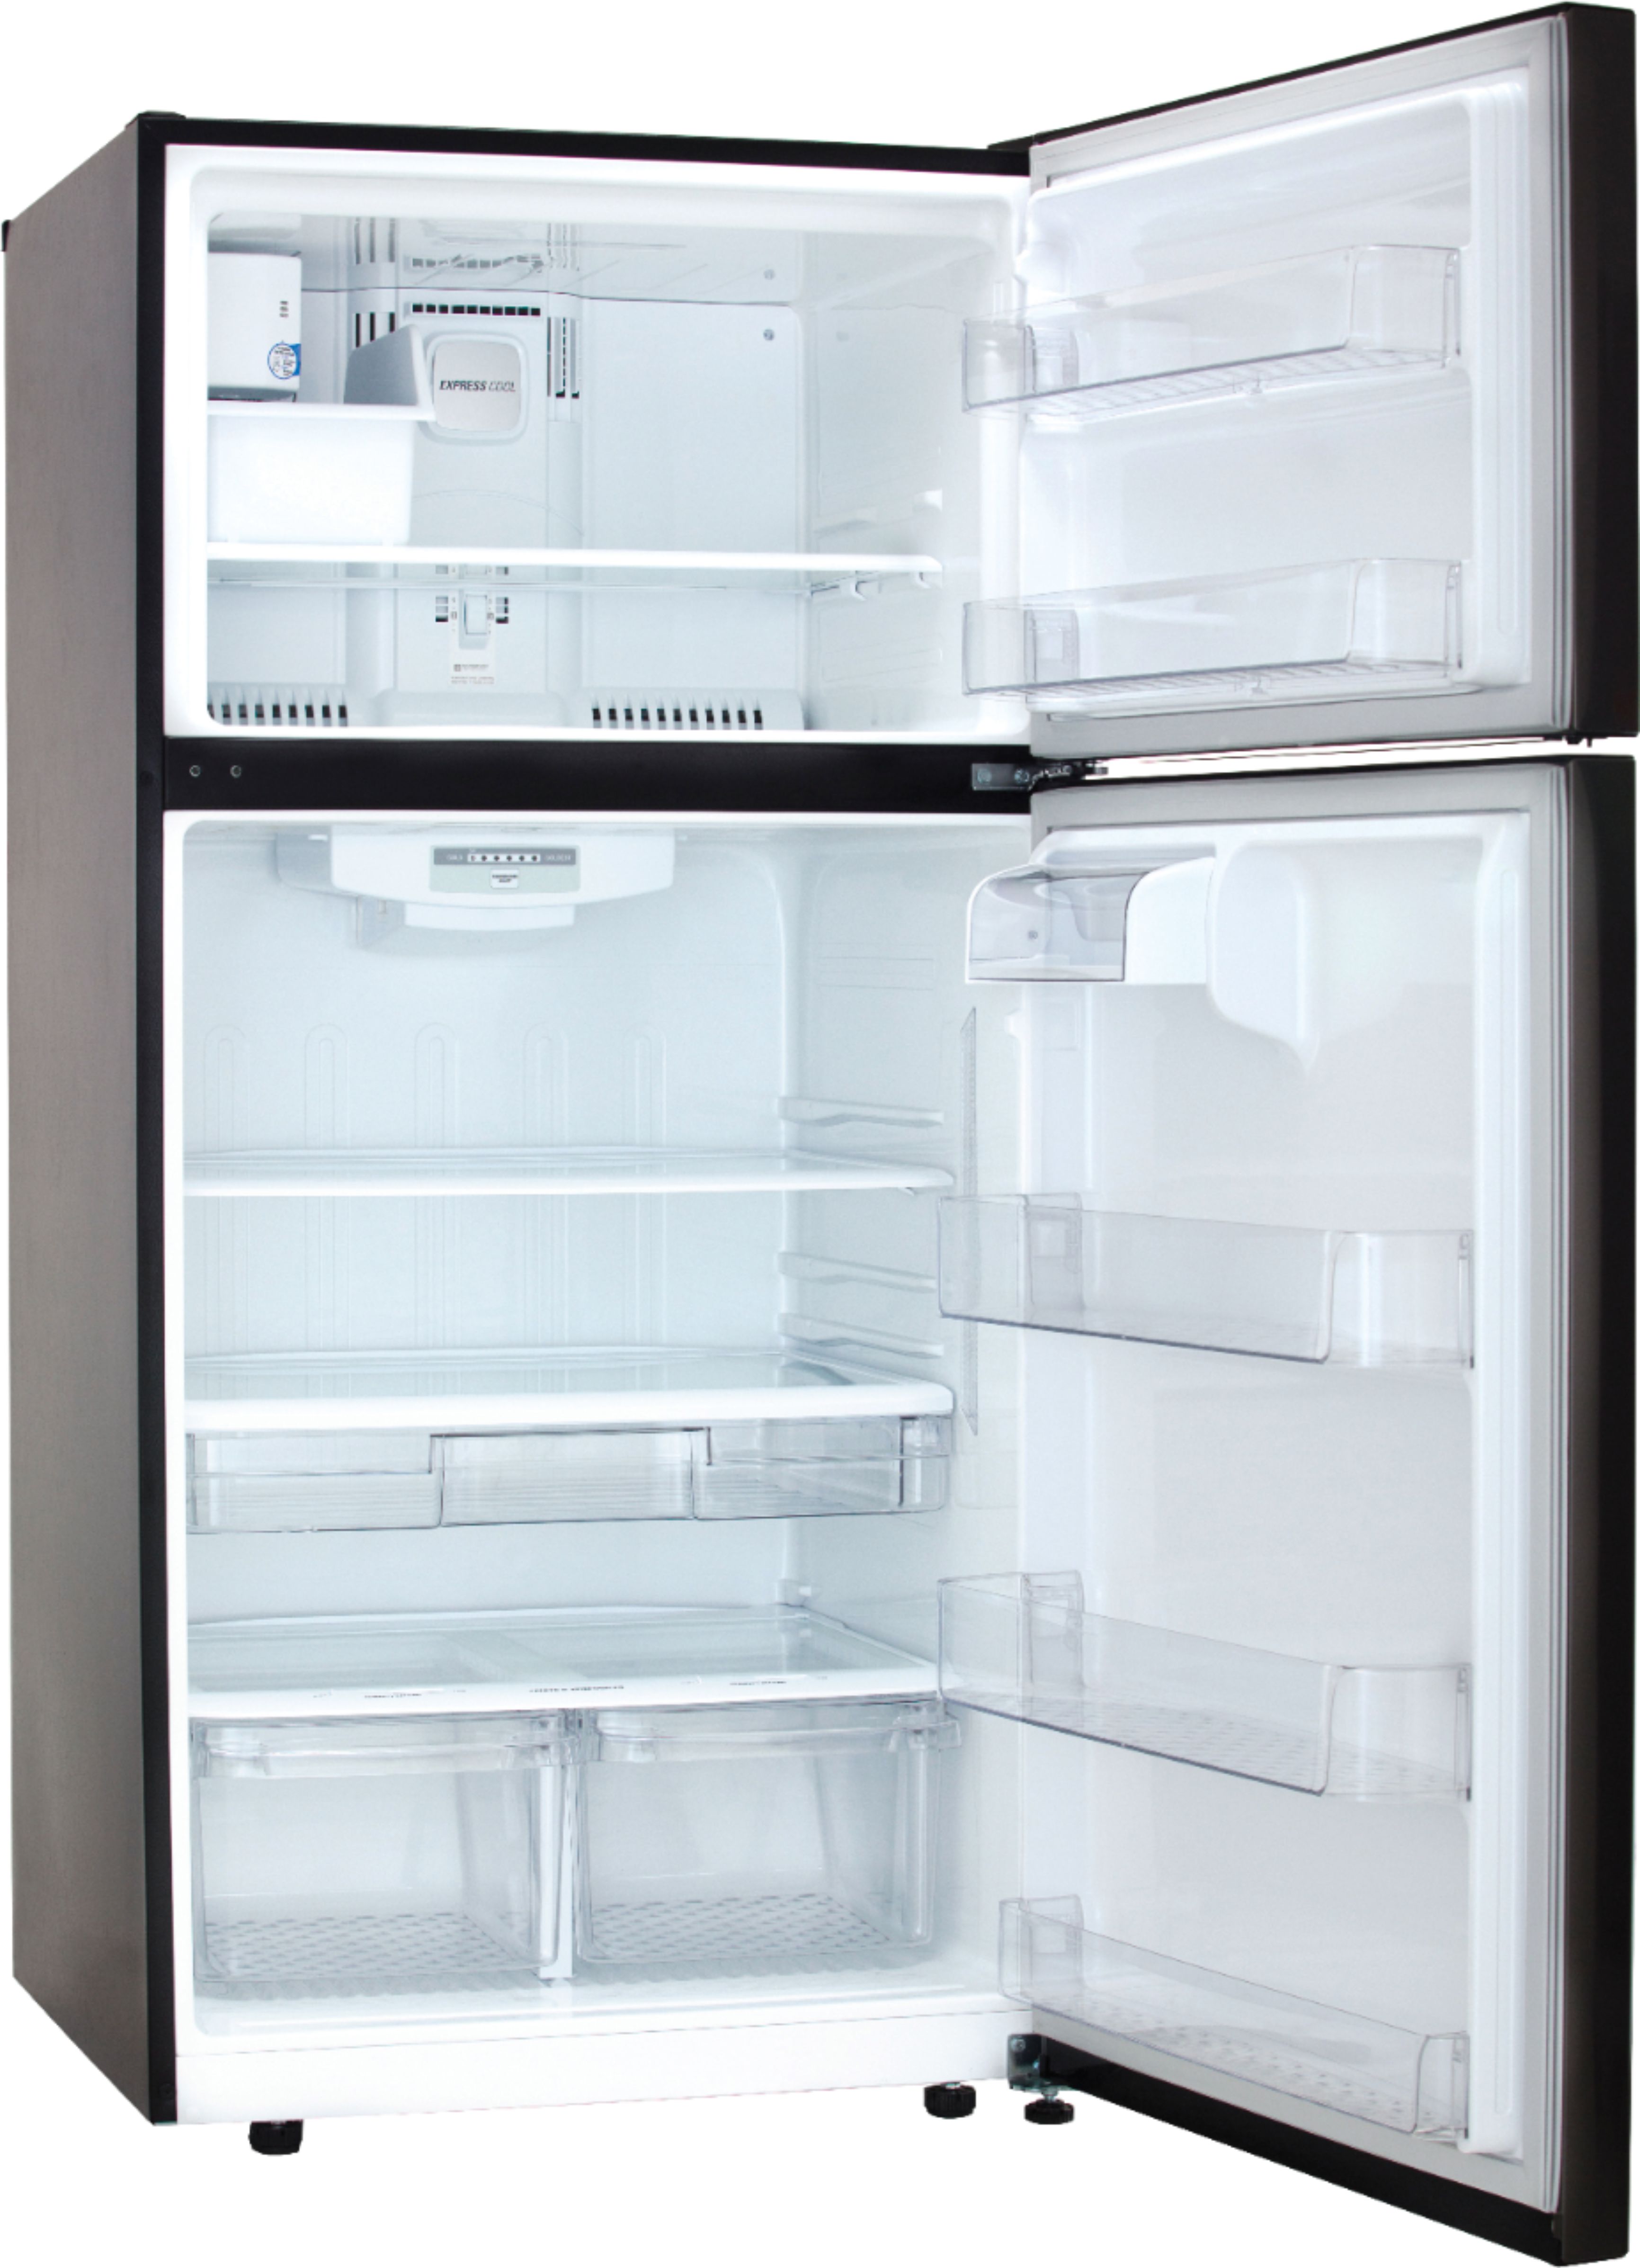 Questions and Answers: LG 23.8 Cu. Ft. Top-Freezer Refrigerator with ...